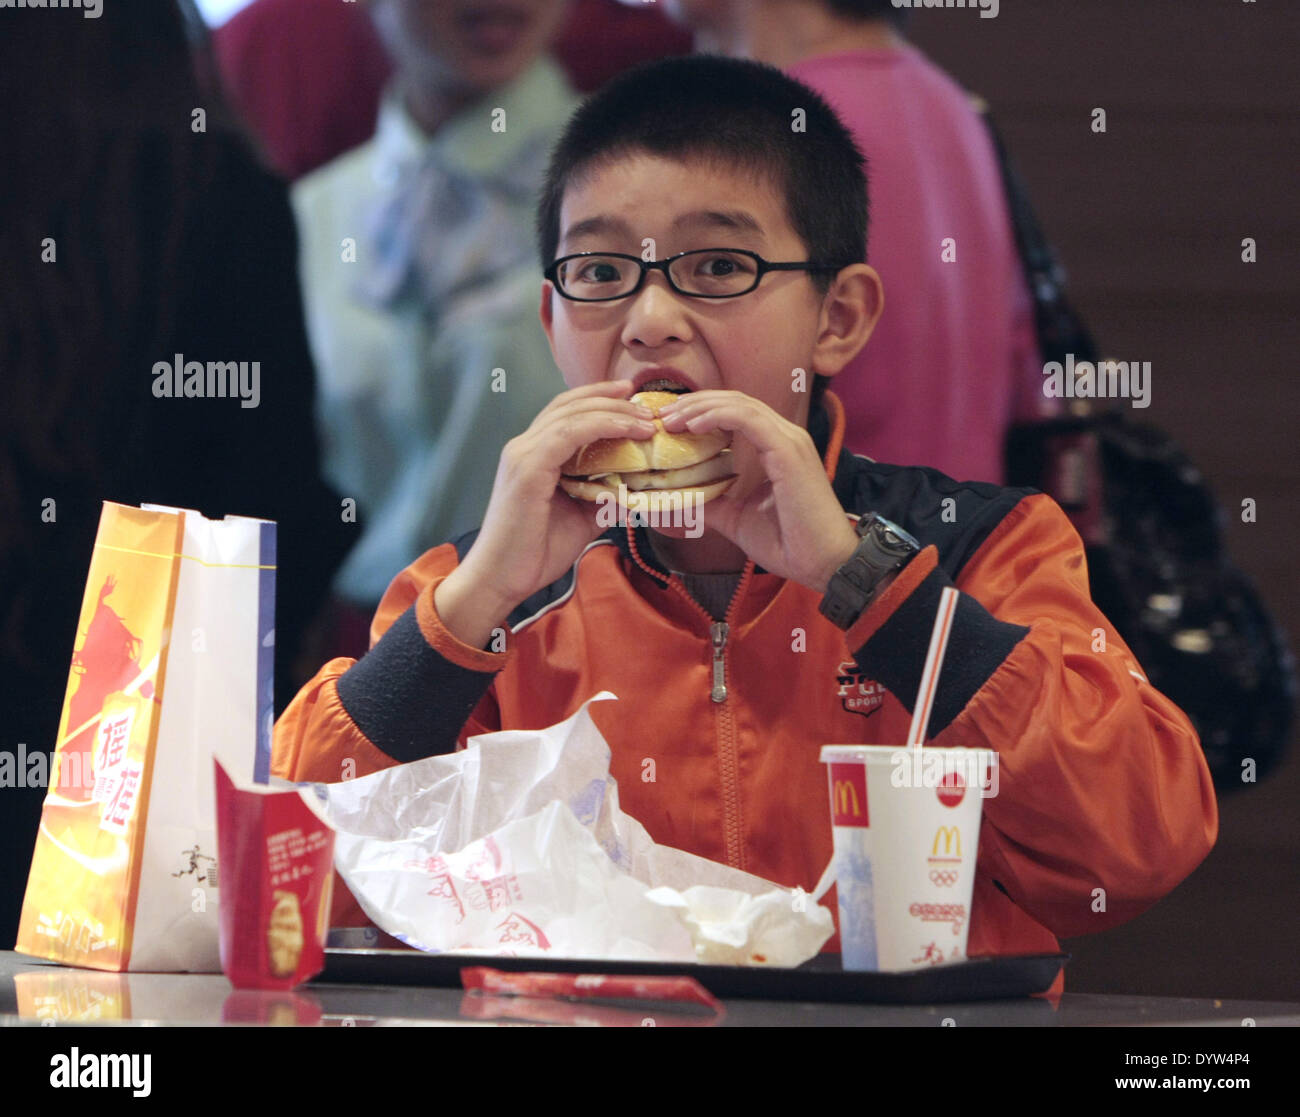 A kid eat in a Mcdonalds restaurant Stock Photo